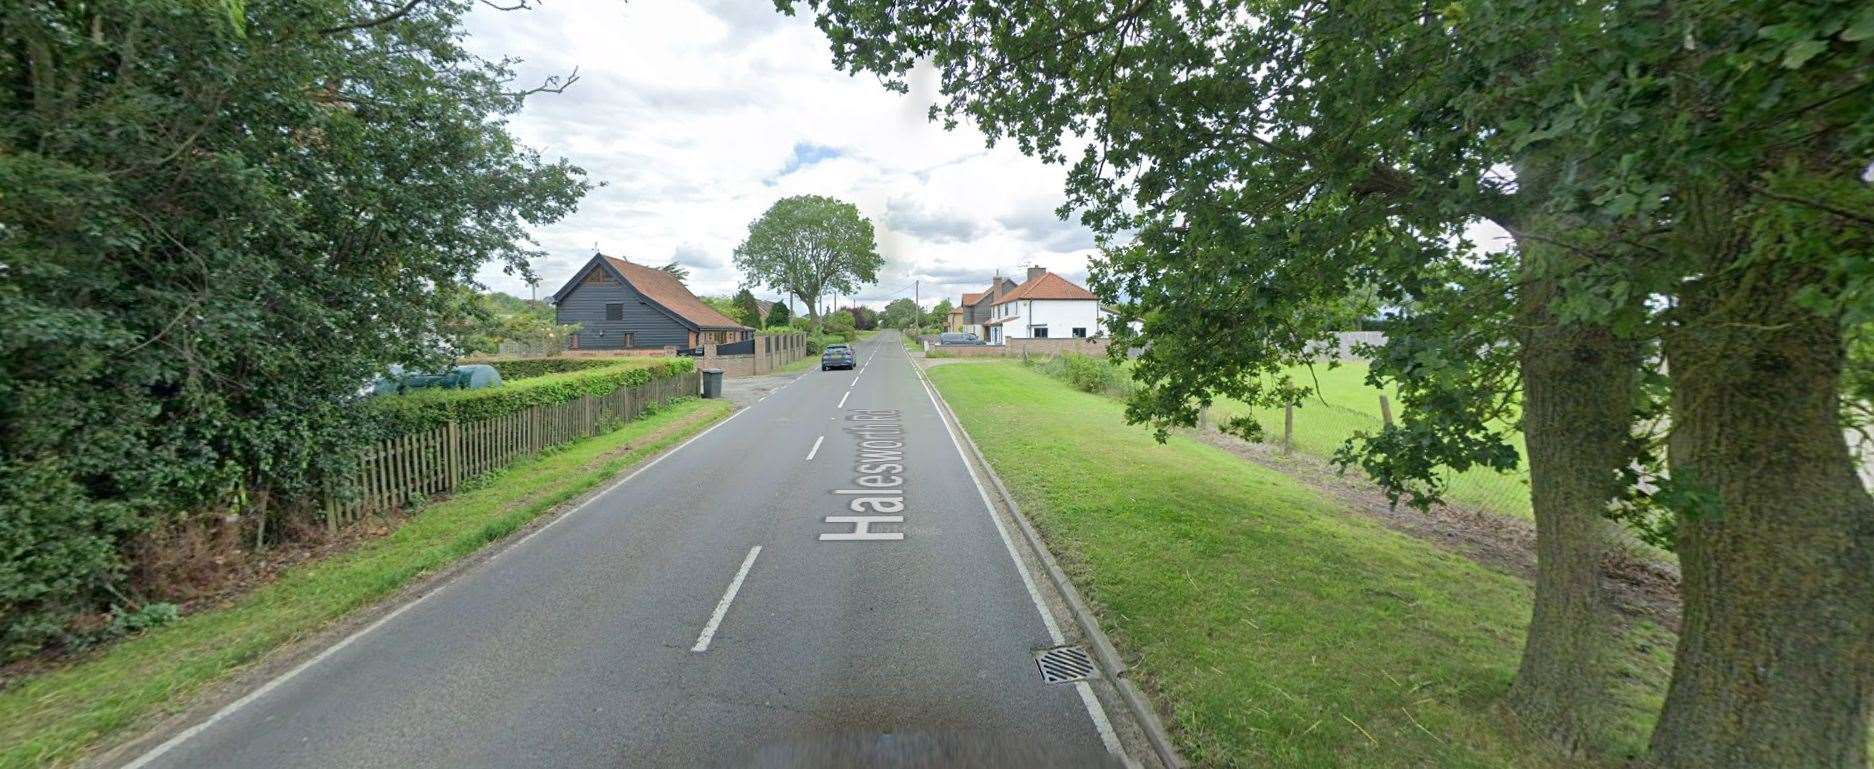 Emergency services are currently attending a serious crash between a pedestrian and a car in Ilketshall St Lawrence, near Beccles. Picture: Google Maps